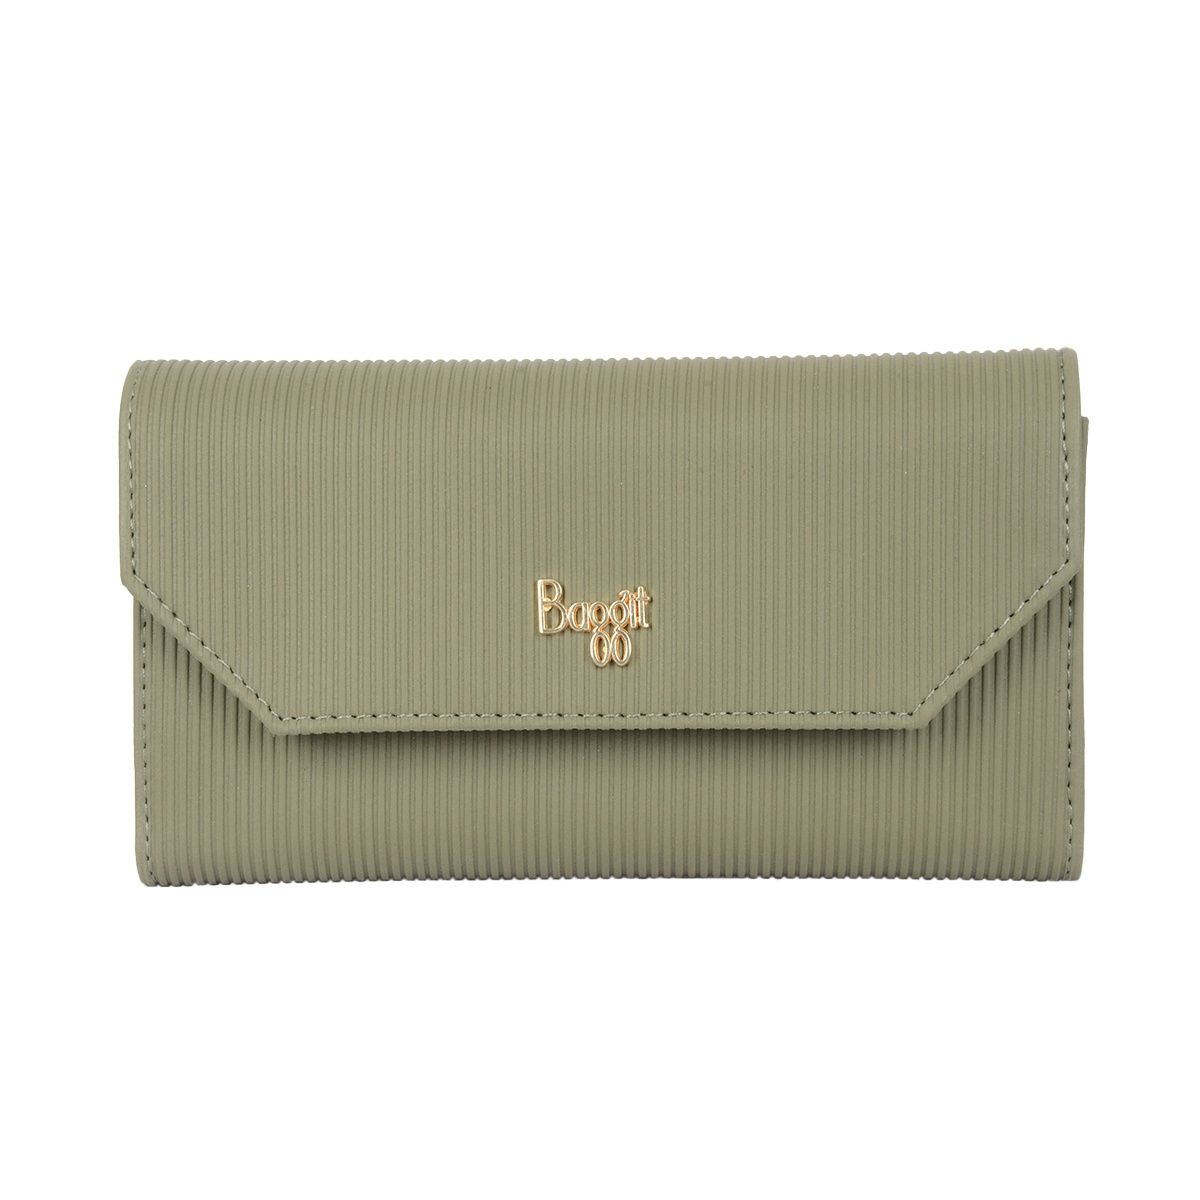 Latest Baggit Wallets & Card Holders arrivals - Women - 65 products |  FASHIOLA INDIA